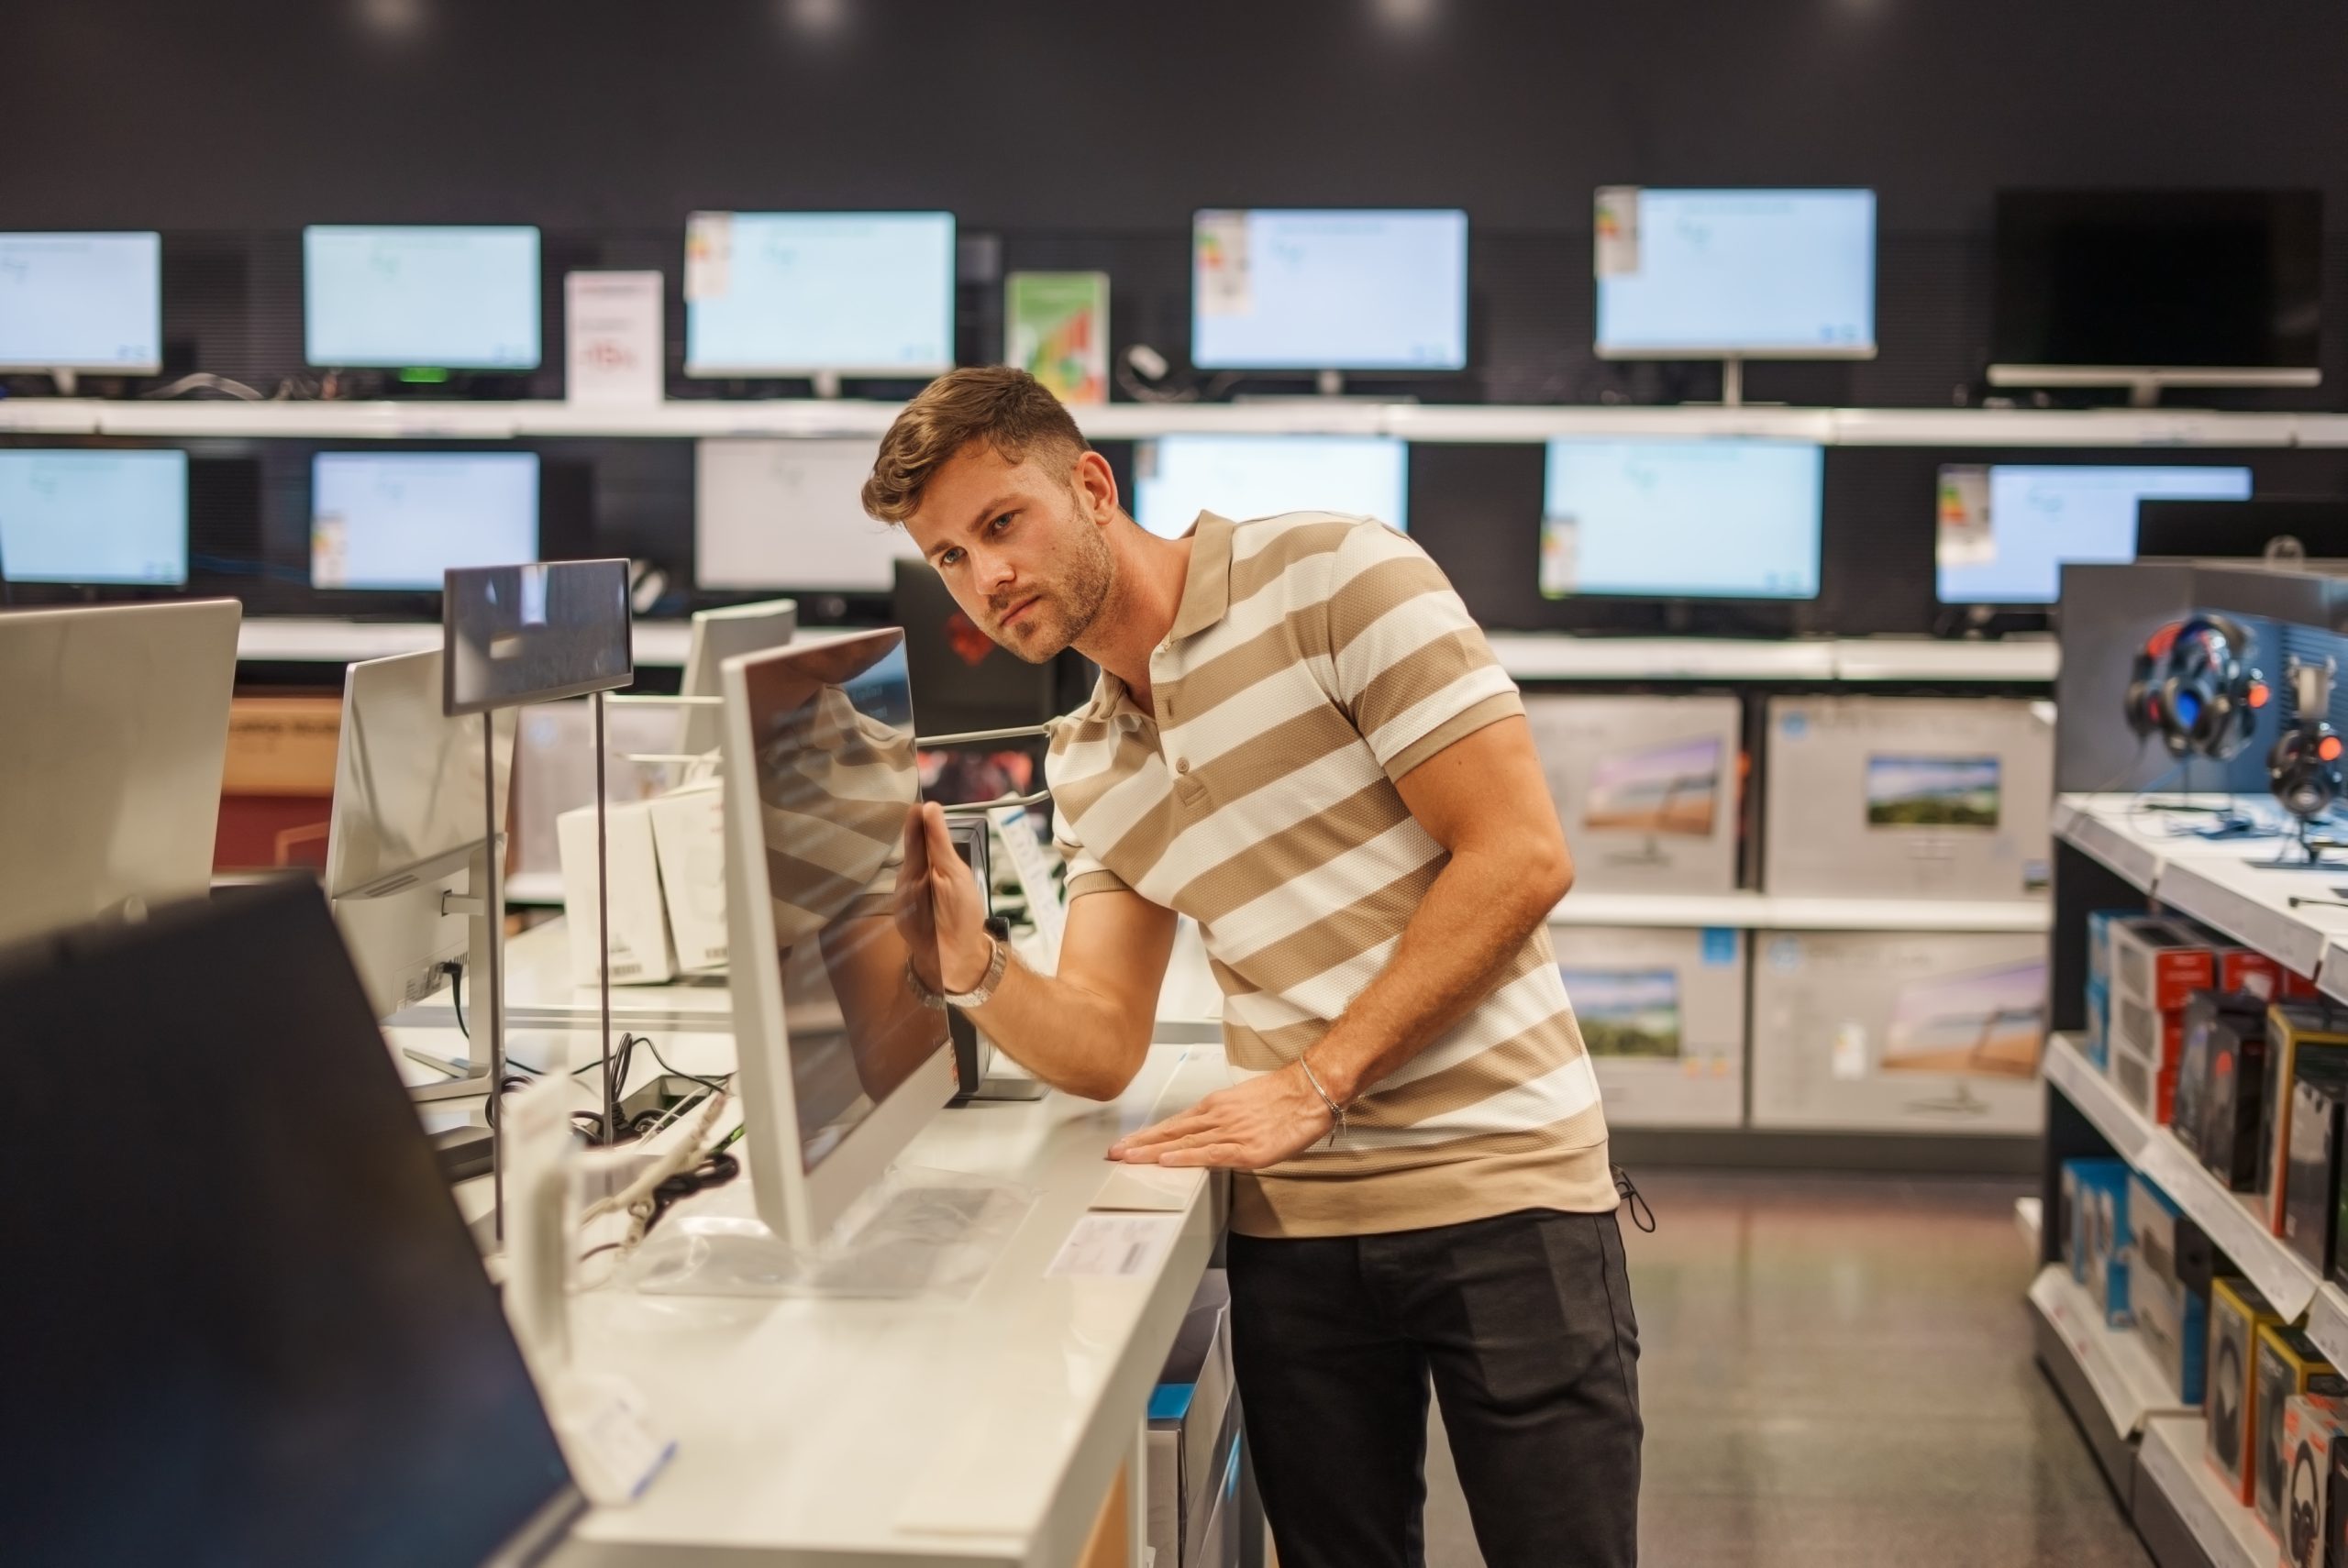 Tips for a Stress-Free Experience When Shopping at Appliance Stores